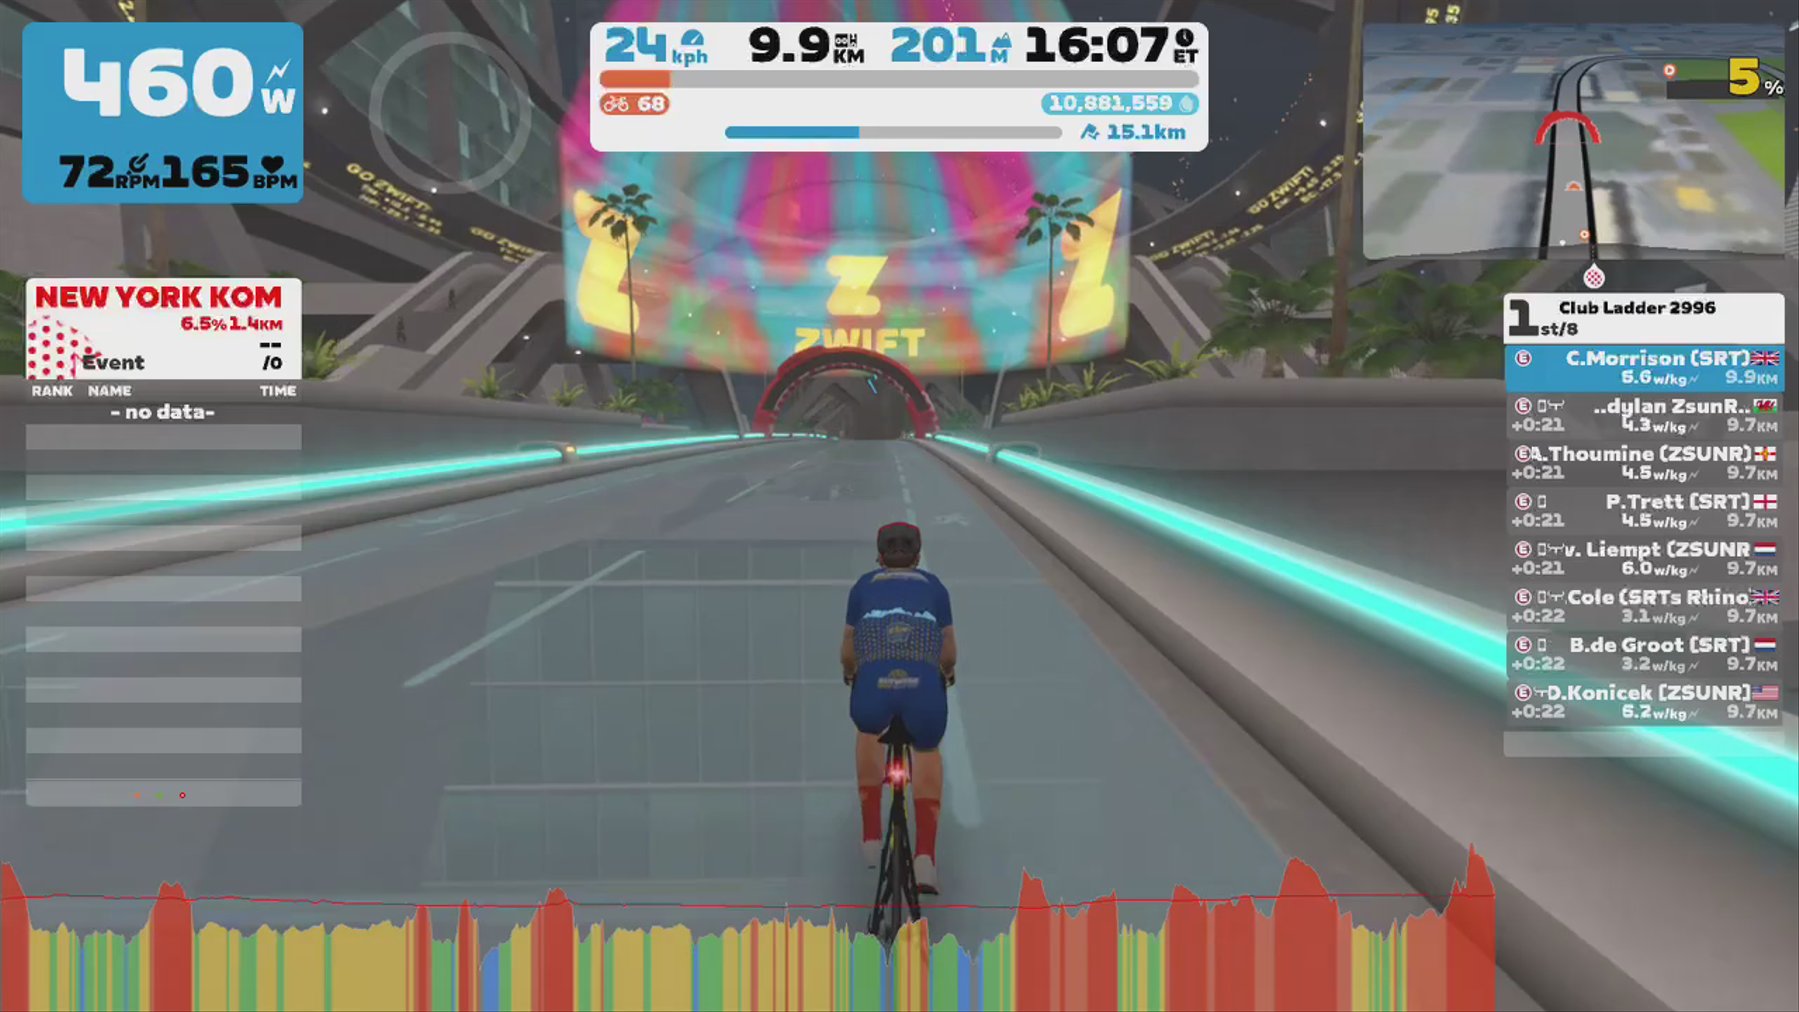 Zwift - Race: Club Ladder 2996 (E) on The Highline in New York